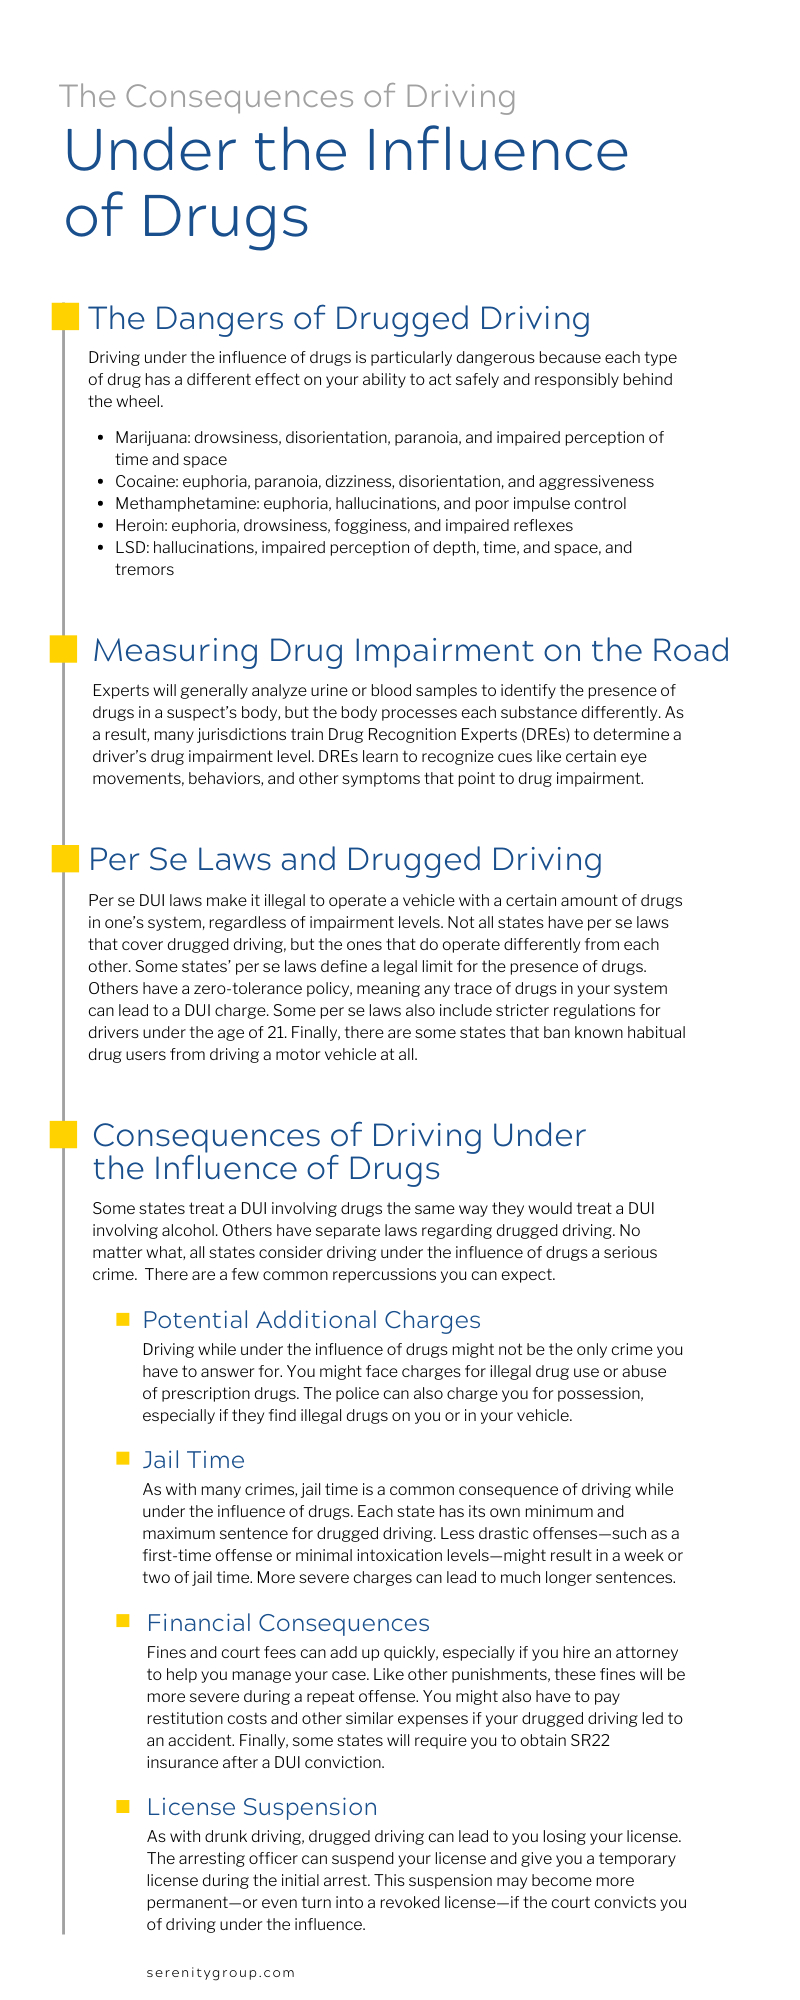 The Consequences of Driving Under the Influence of Drugs